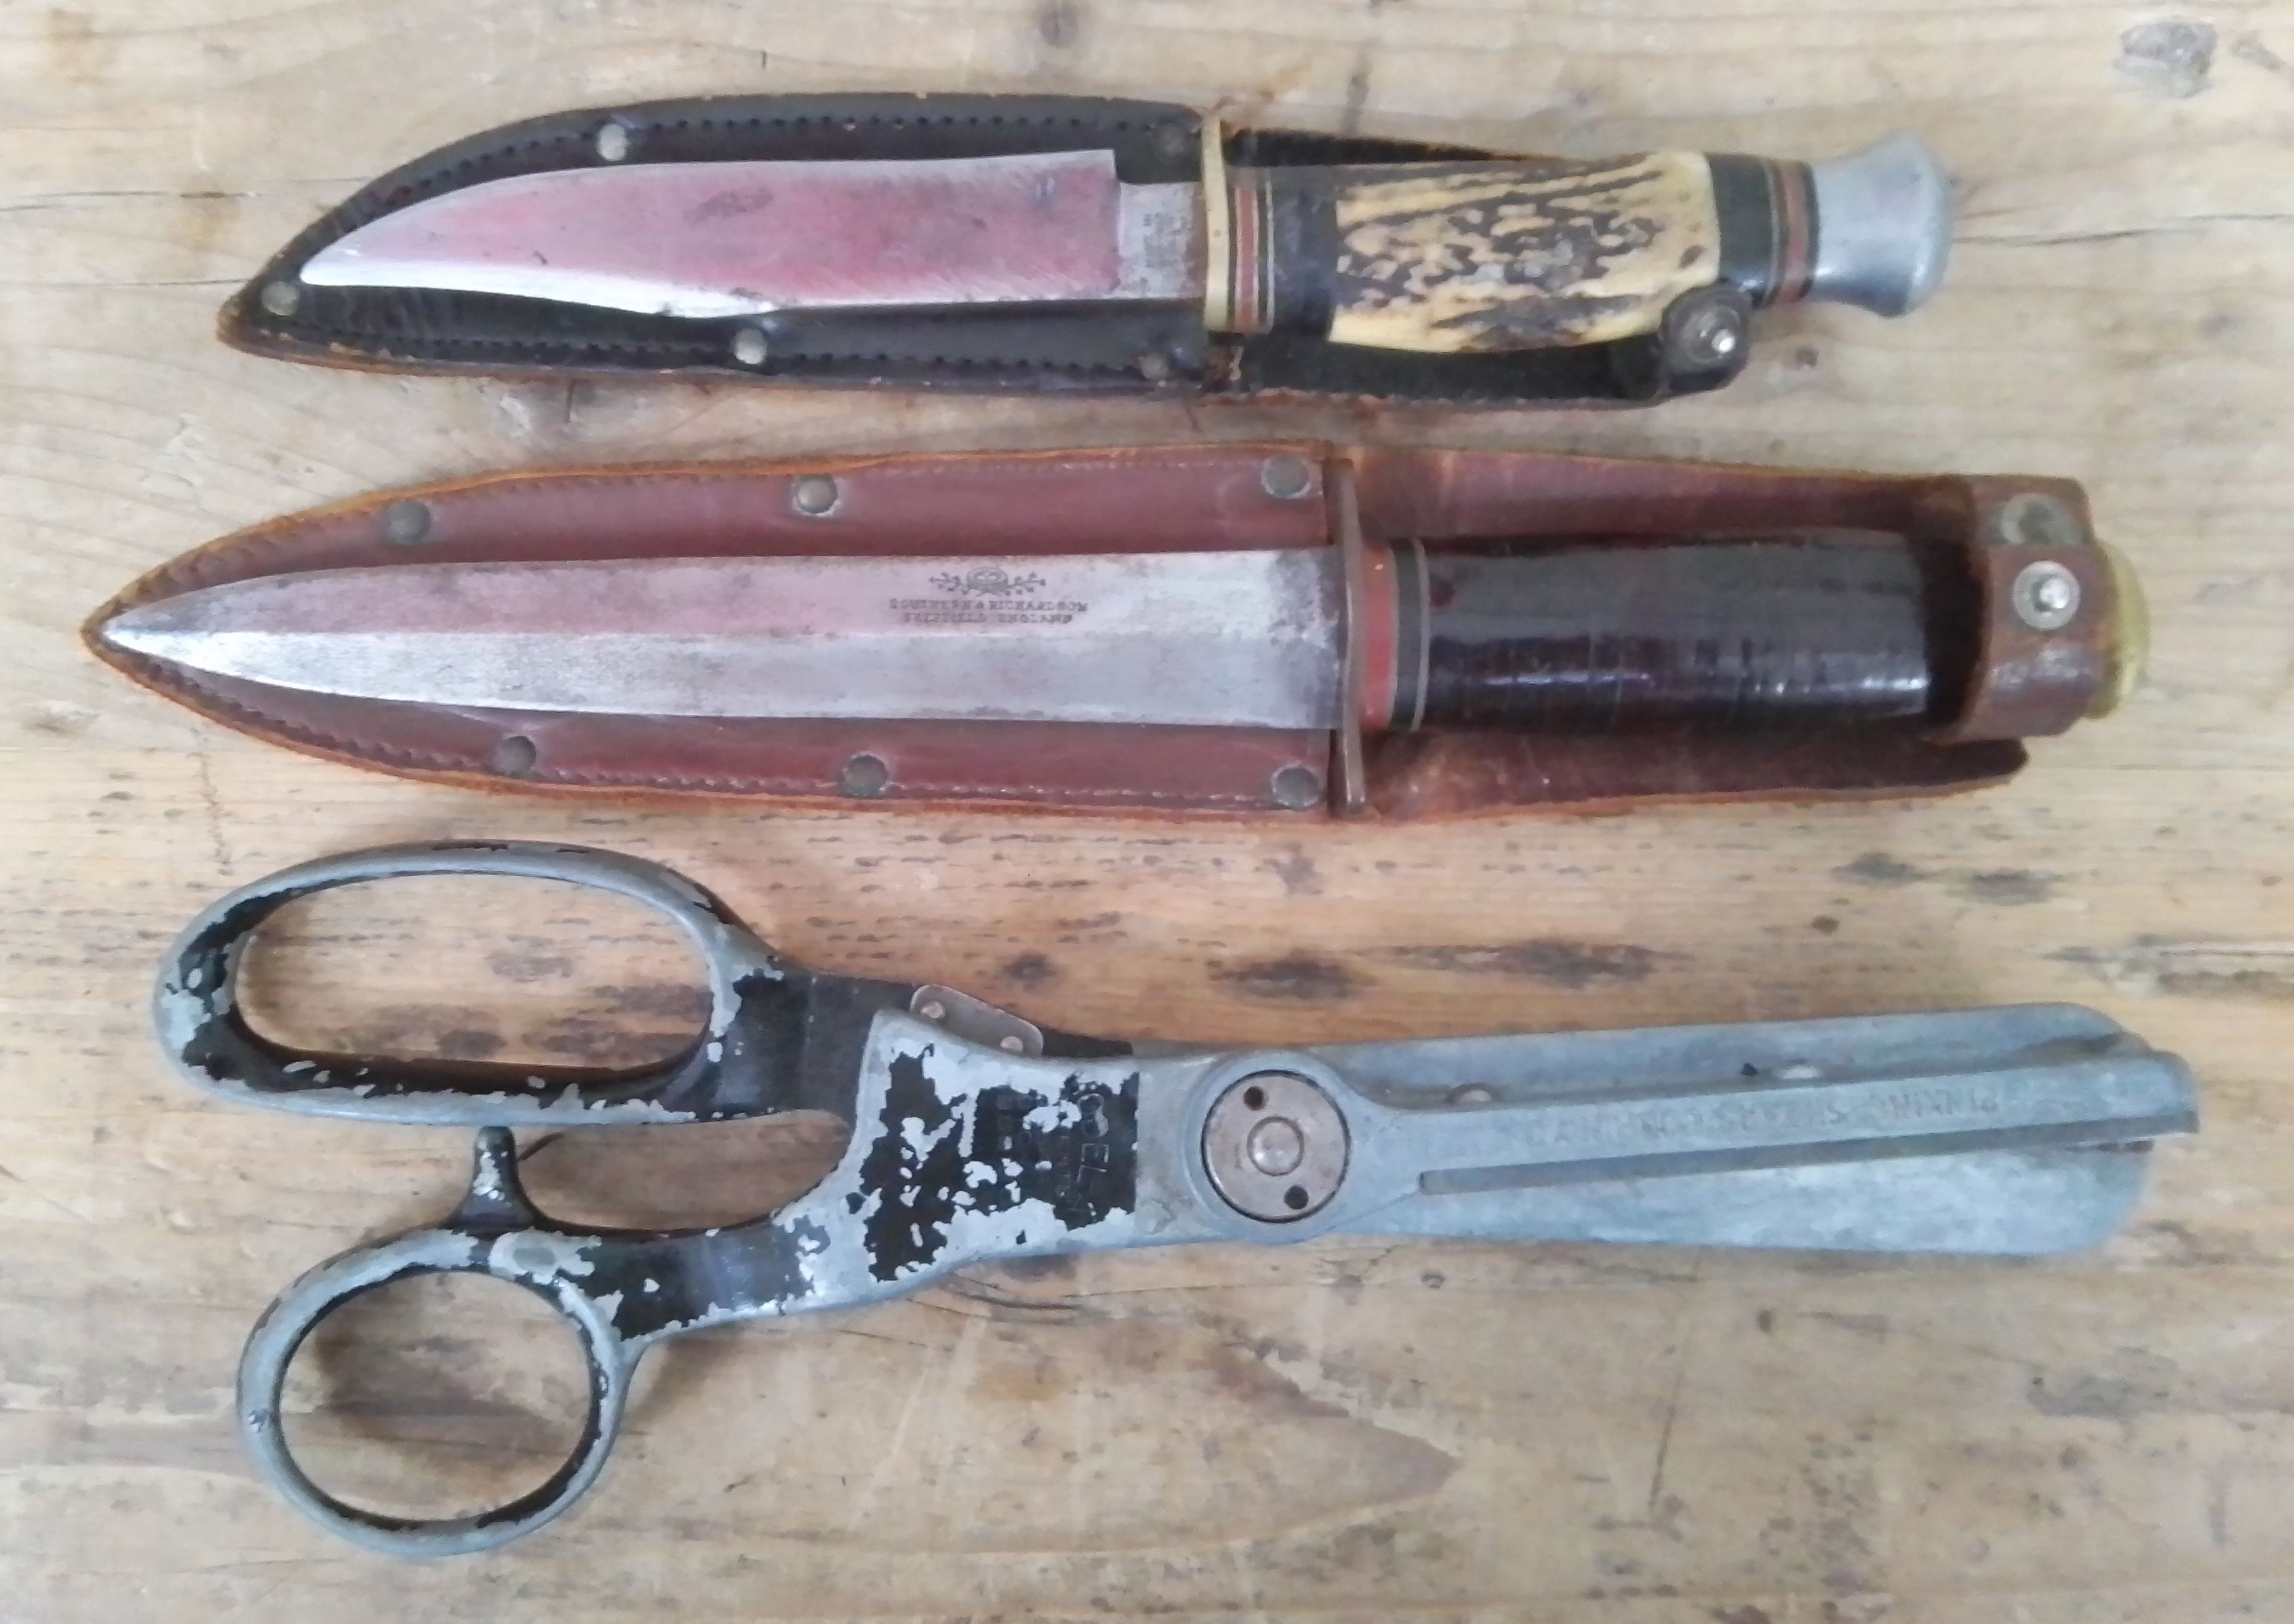 Two hunting knives & a pair of pinking shears.